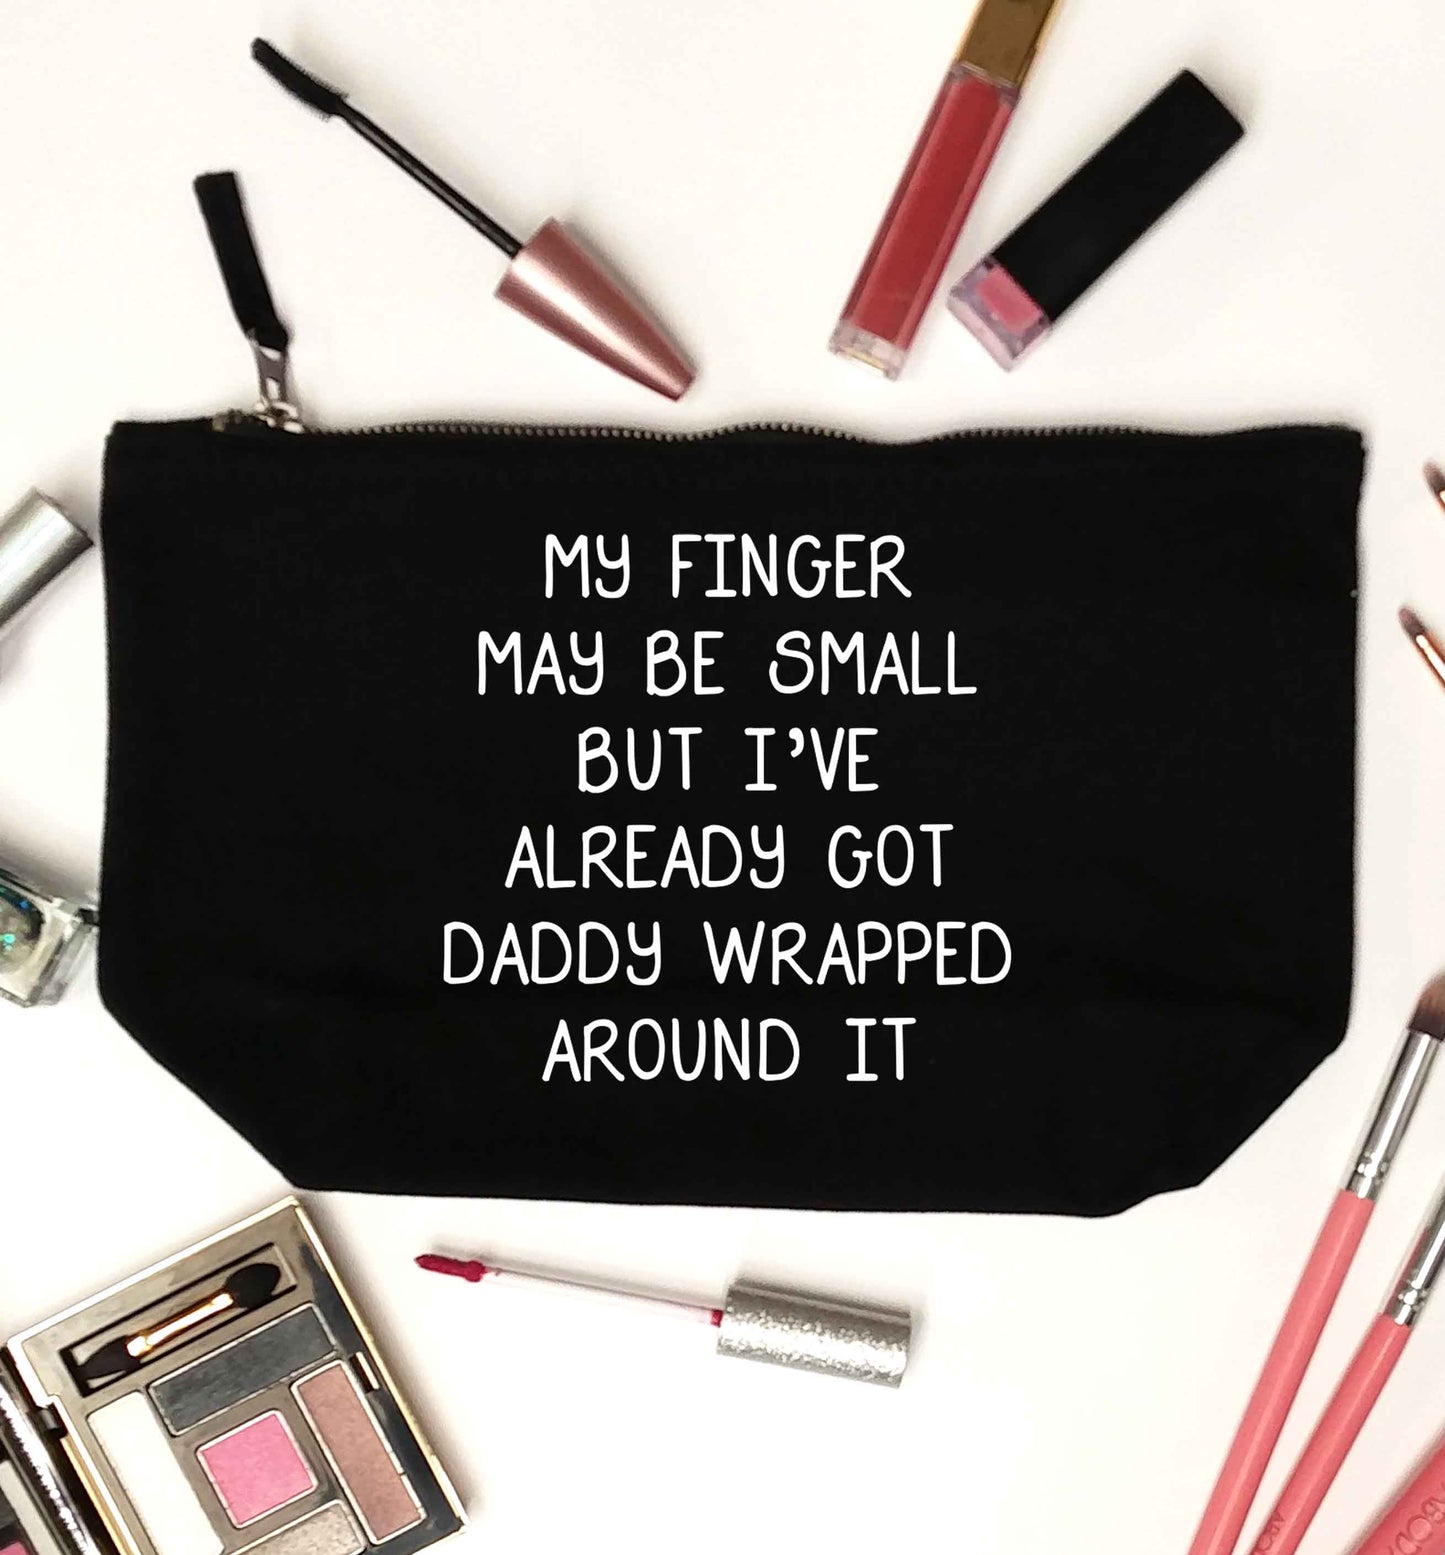 My finger may be small but I've already got daddy wrapped around it black makeup bag